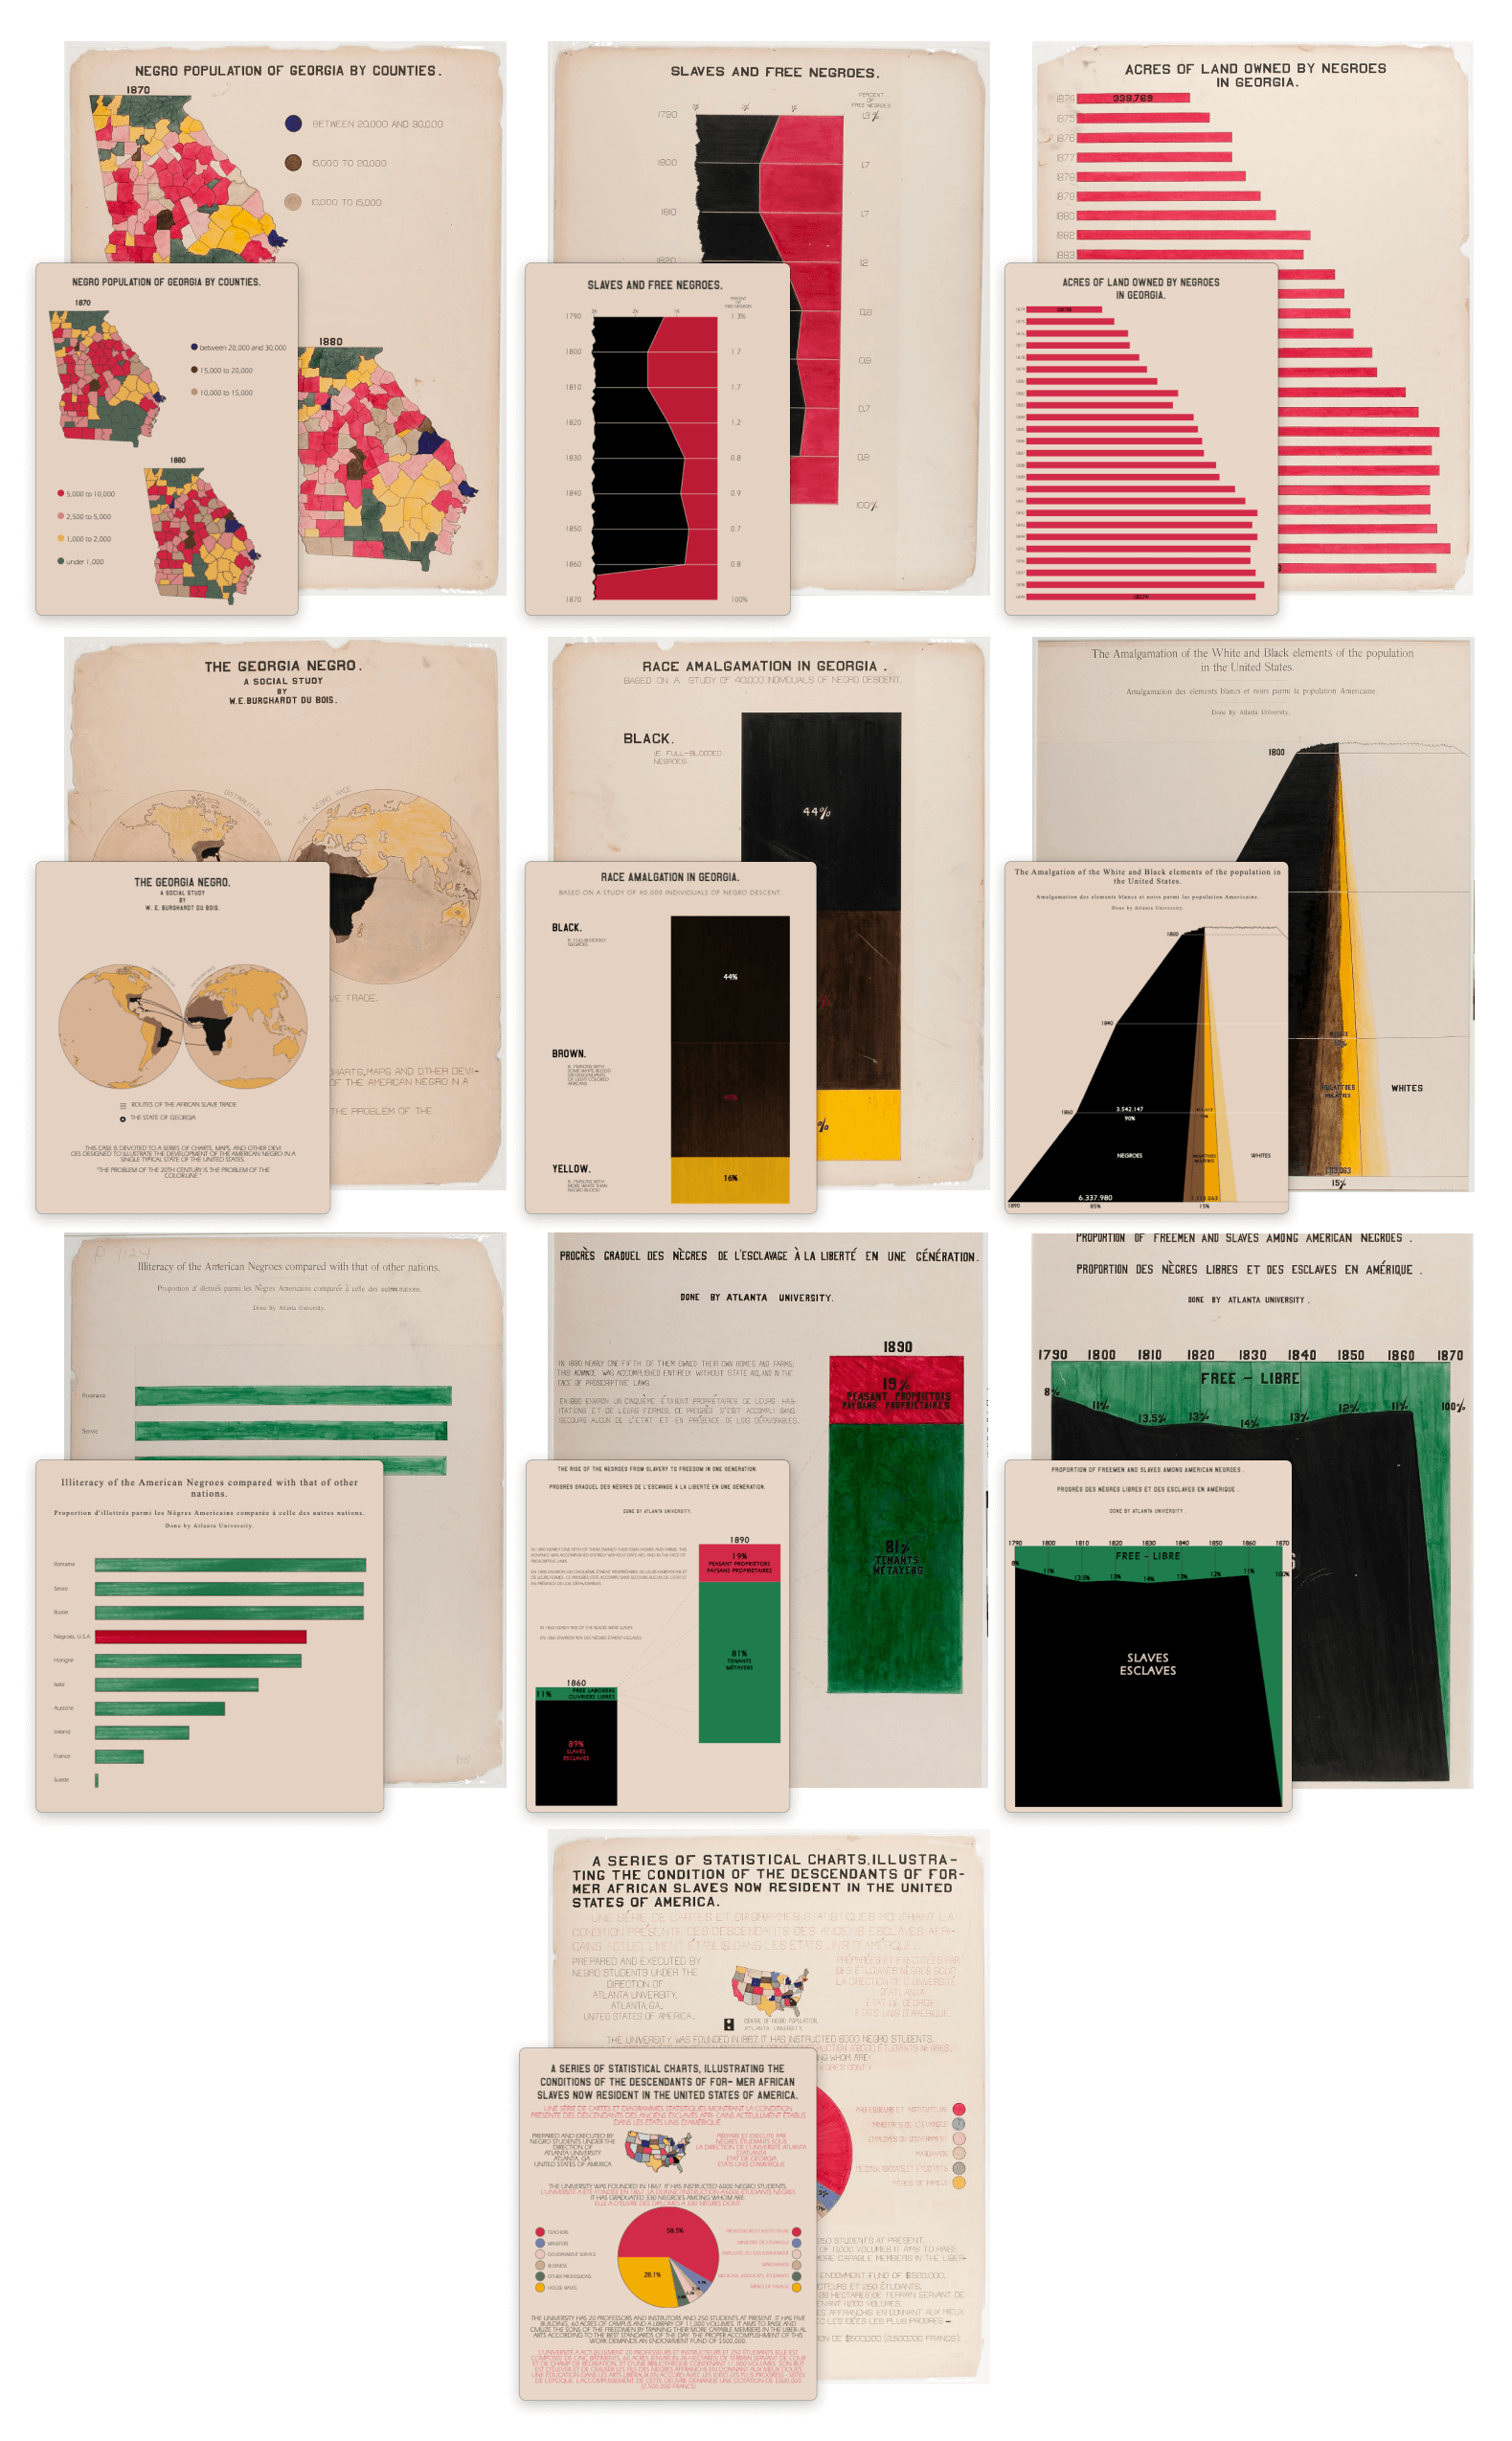 All ten original data visualizations with my recreations on top, ordered ascending per week.